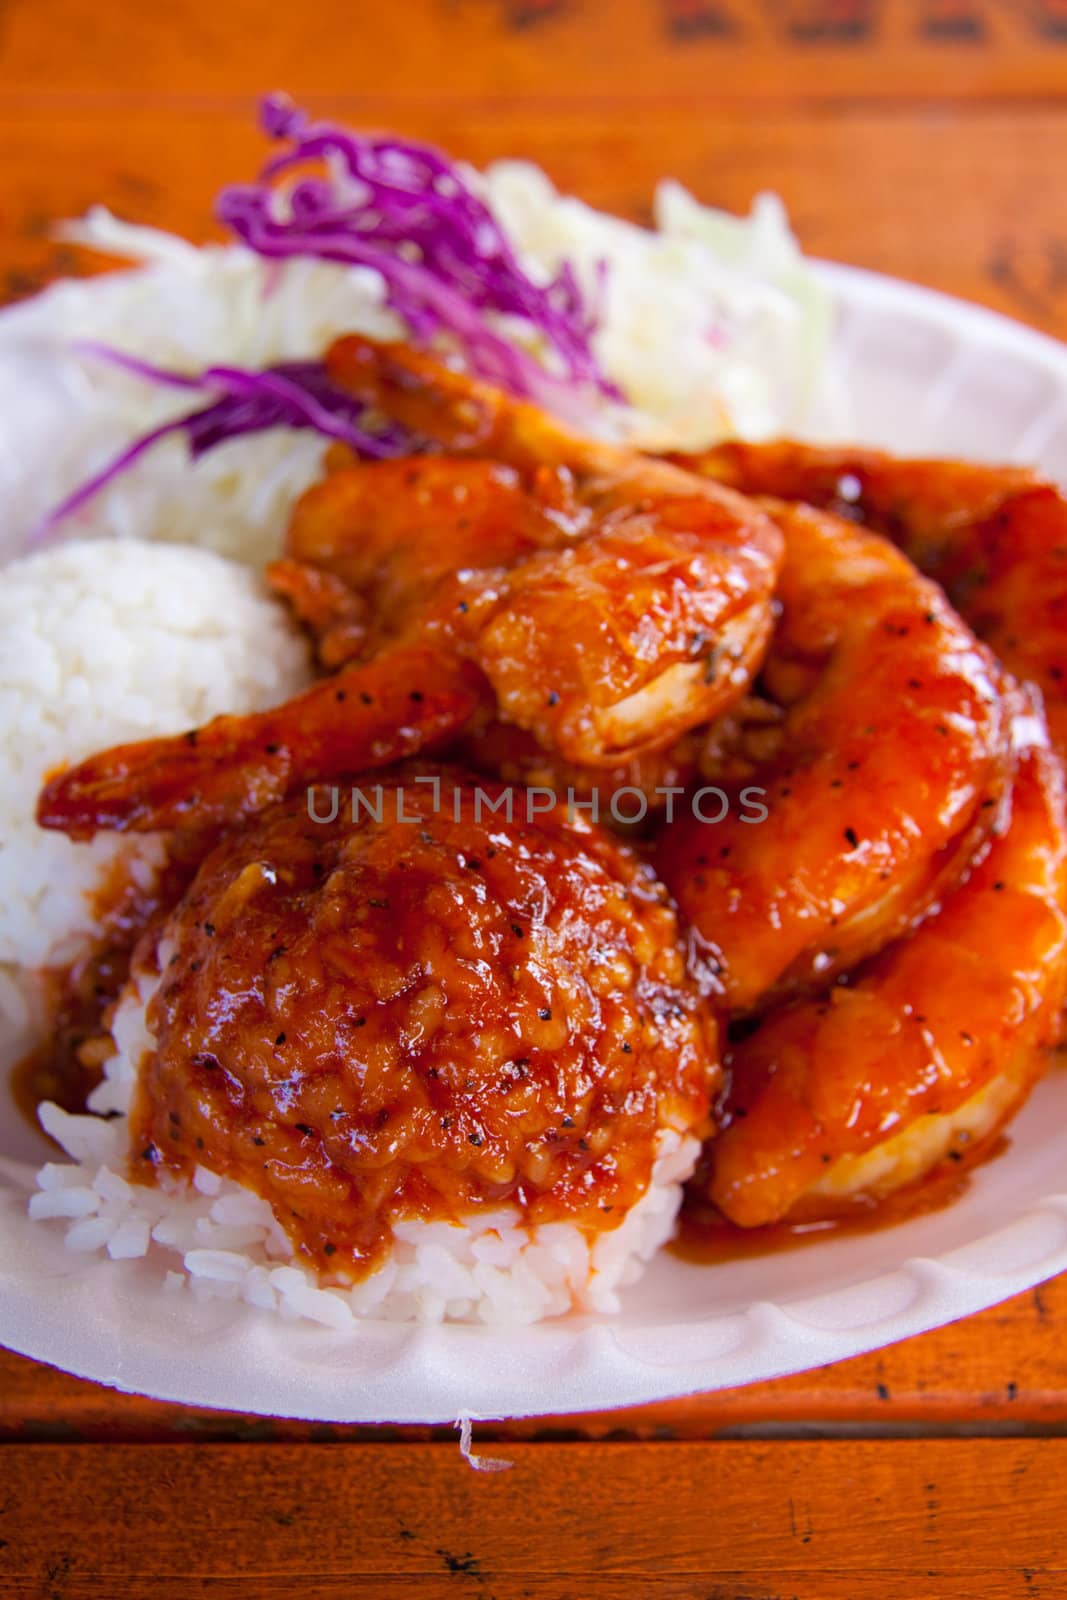 A nice plate of shrimp, rice and pineapple or garlic with rice and coleslaw in Hawaii.